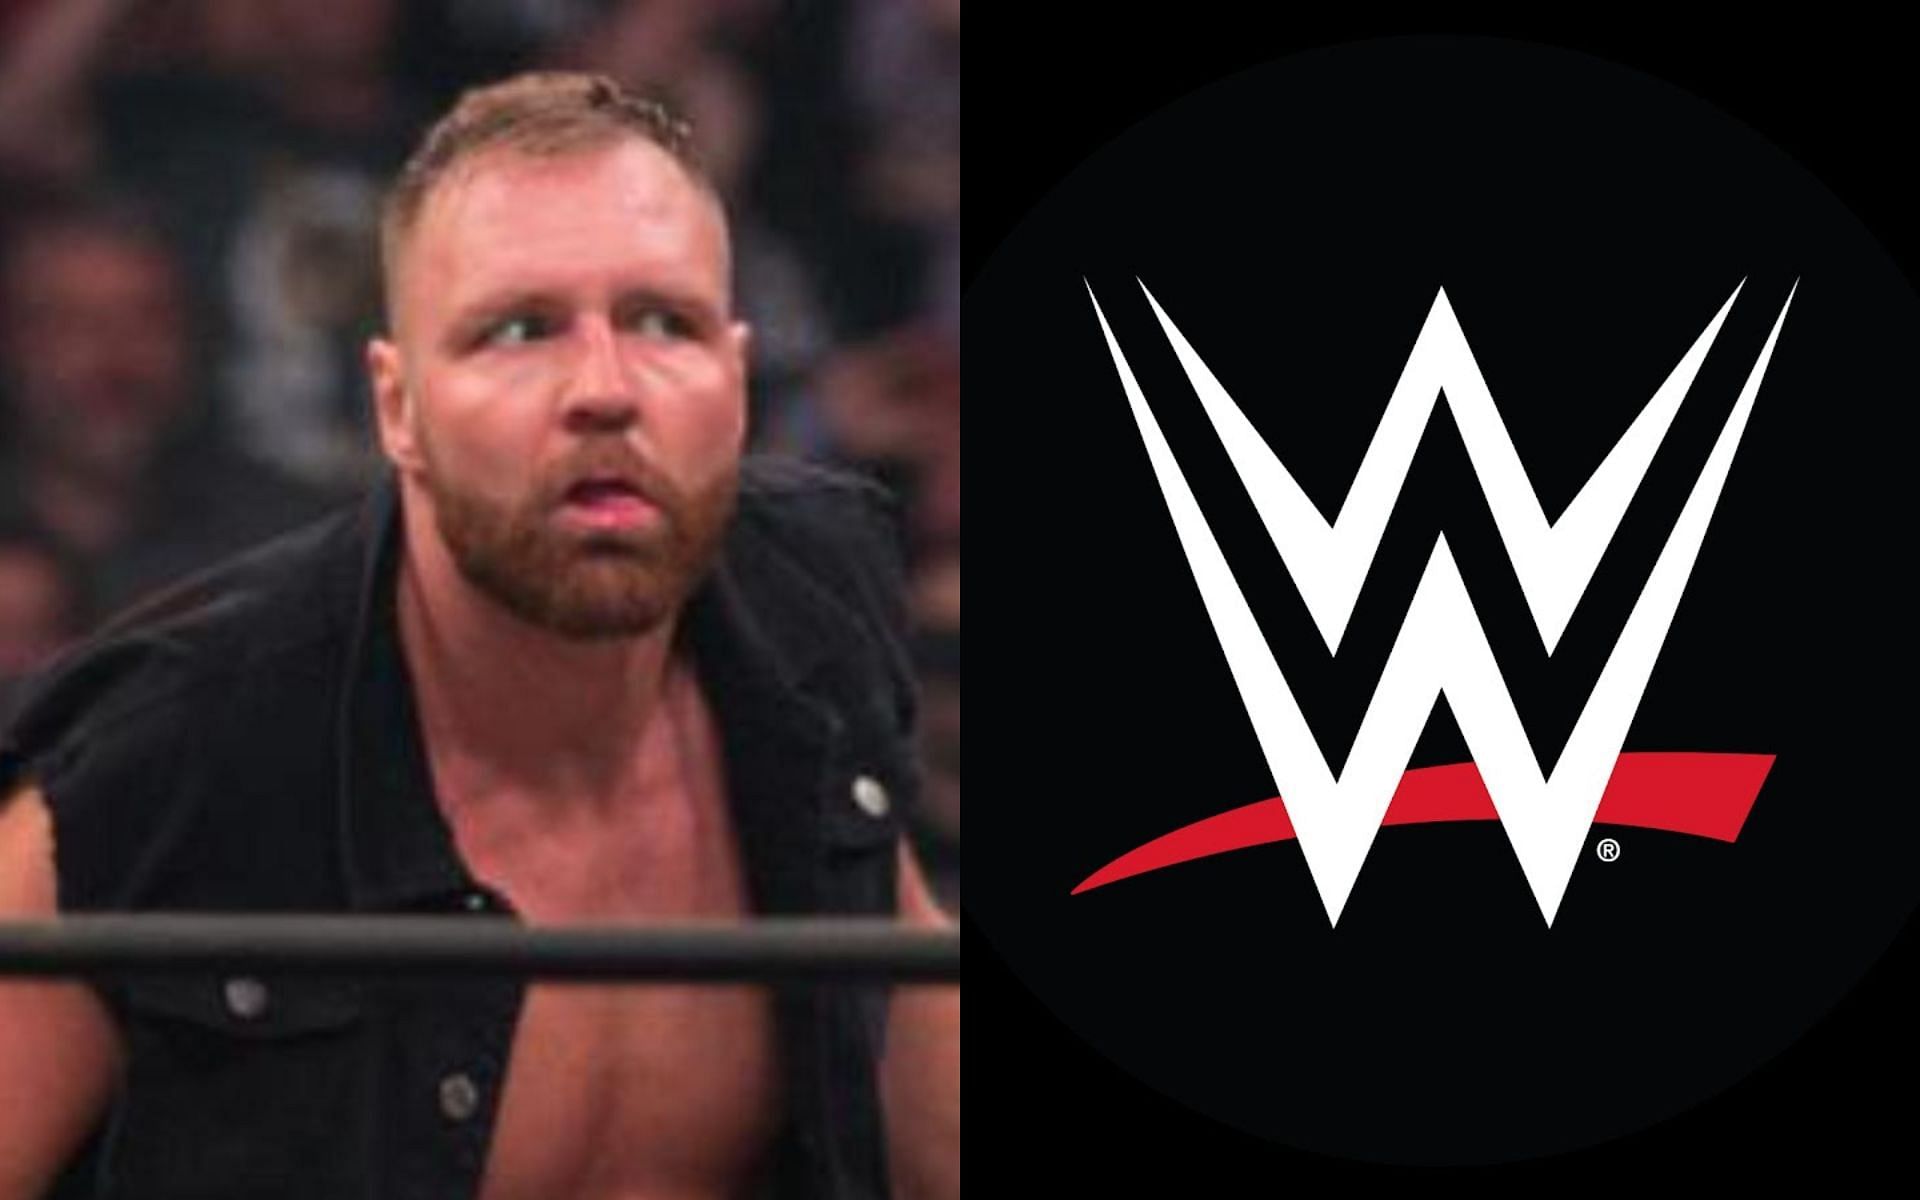 Current AEW World Champion Jon Moxley was a former WWE Superstar.